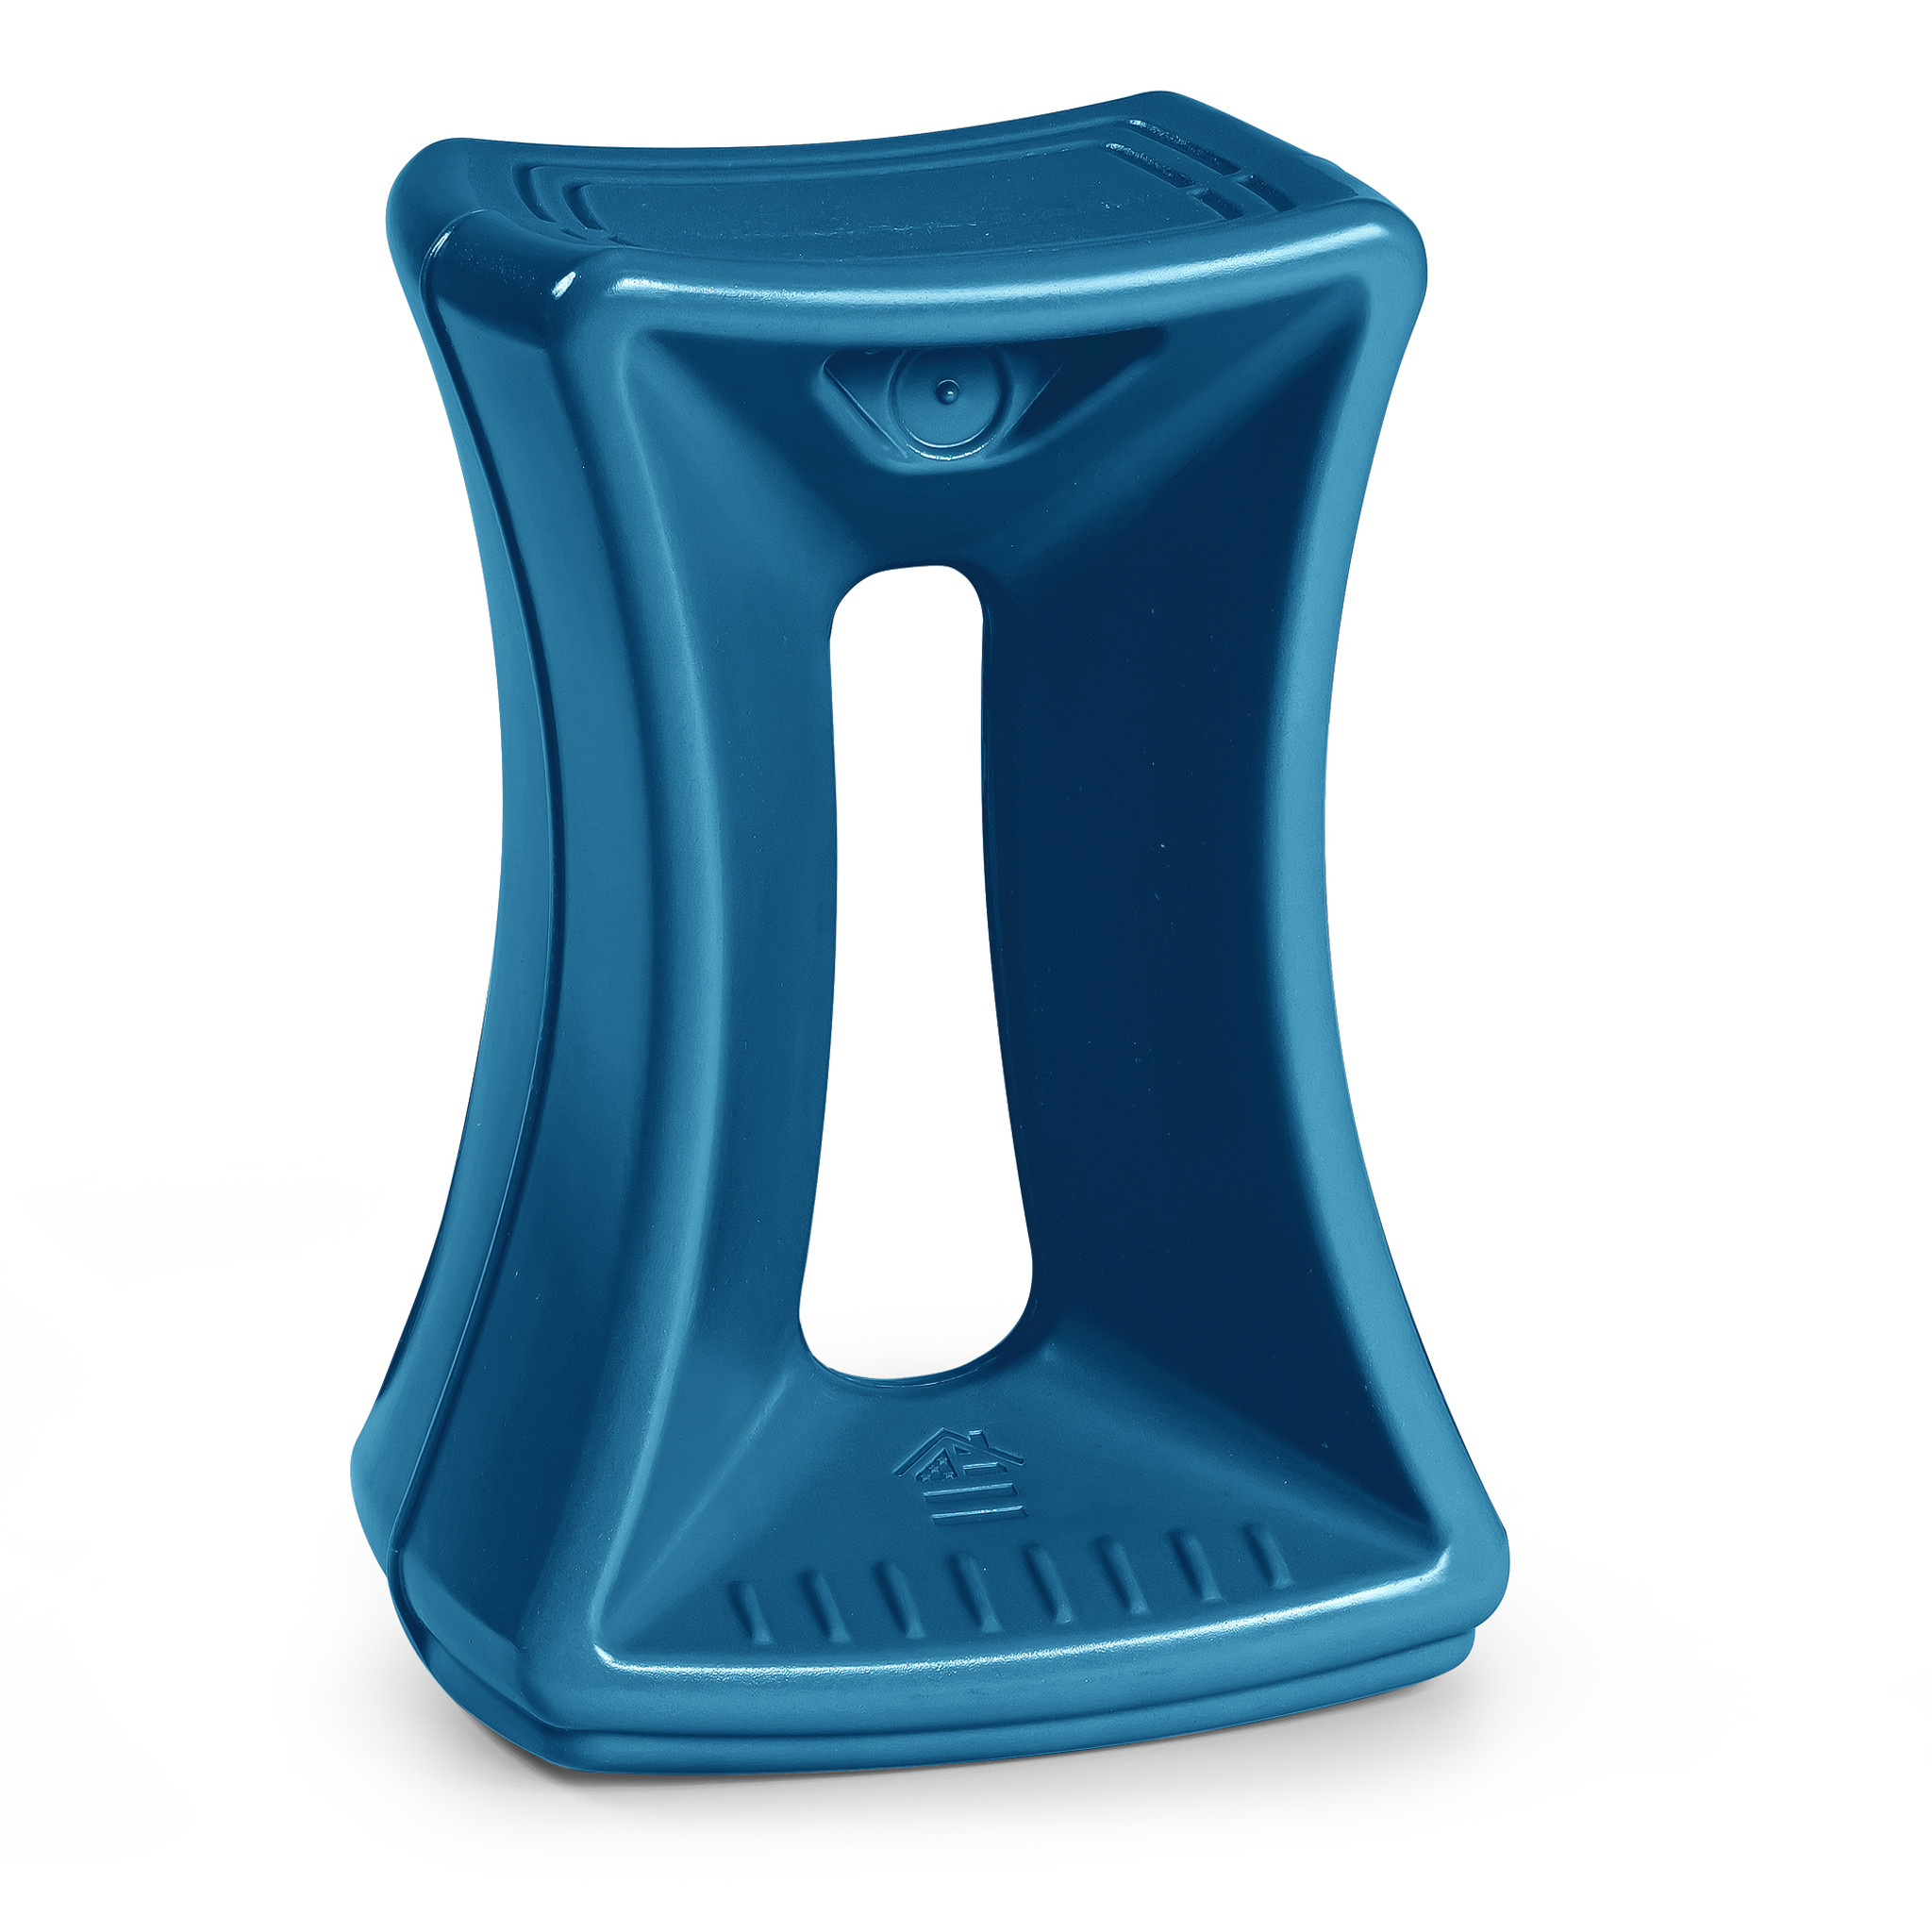 Simplay3 Big Wiggle Chair - Blue 14 in